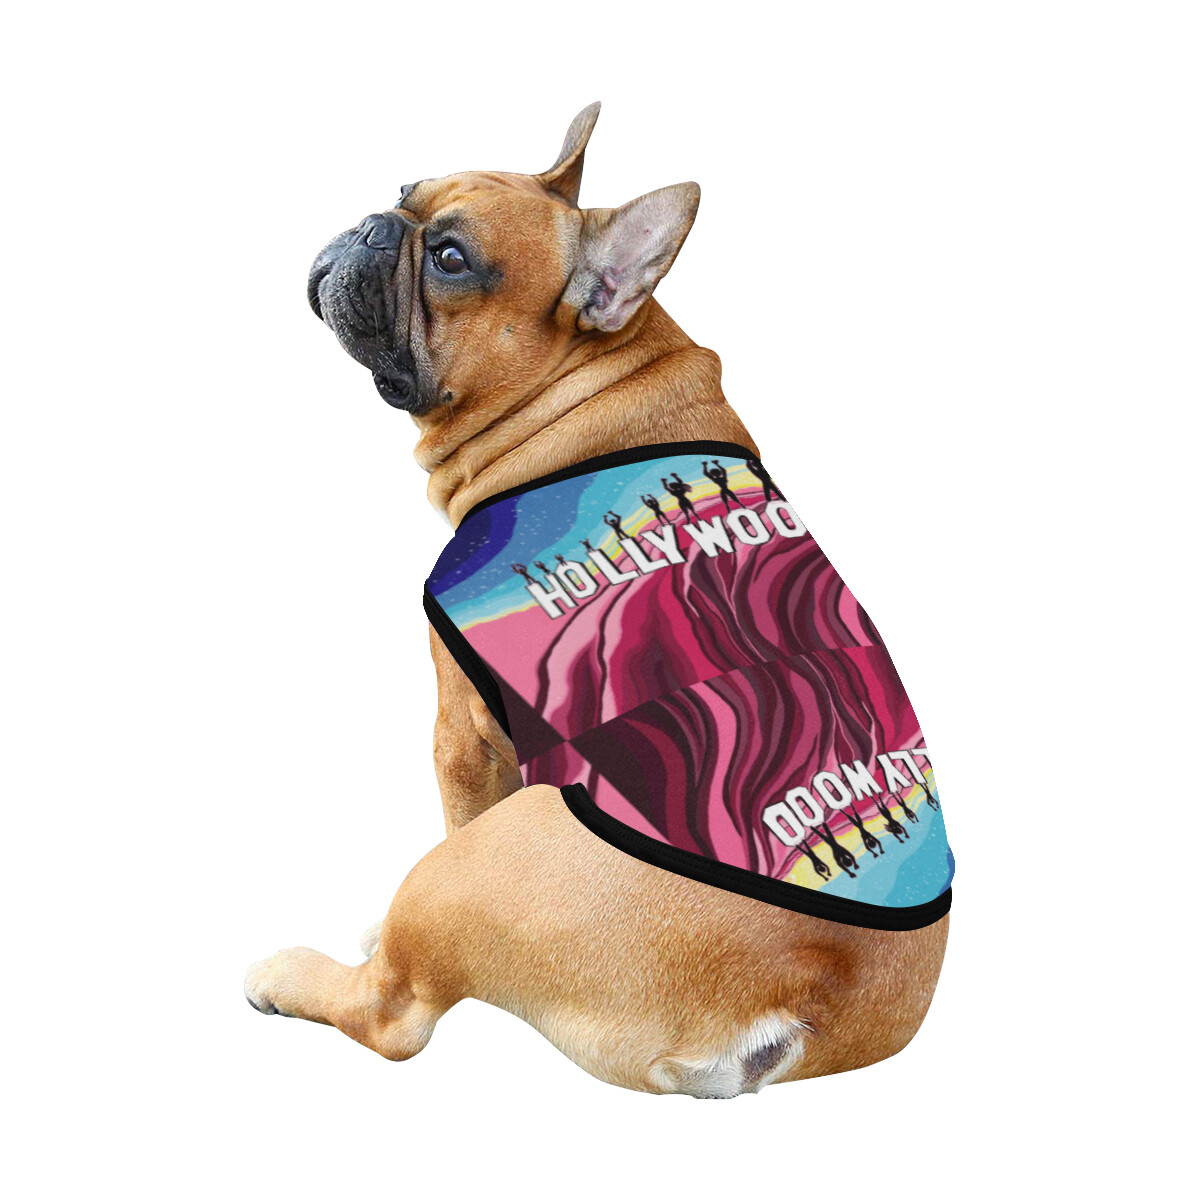 🐕 Hollywood women empowerment super heroes Dog shirt, Dog Tank Top, Dog t-shirt, Dog clothes, Gifts, front back print, 7 sizes XS to 3XL, dog gifts